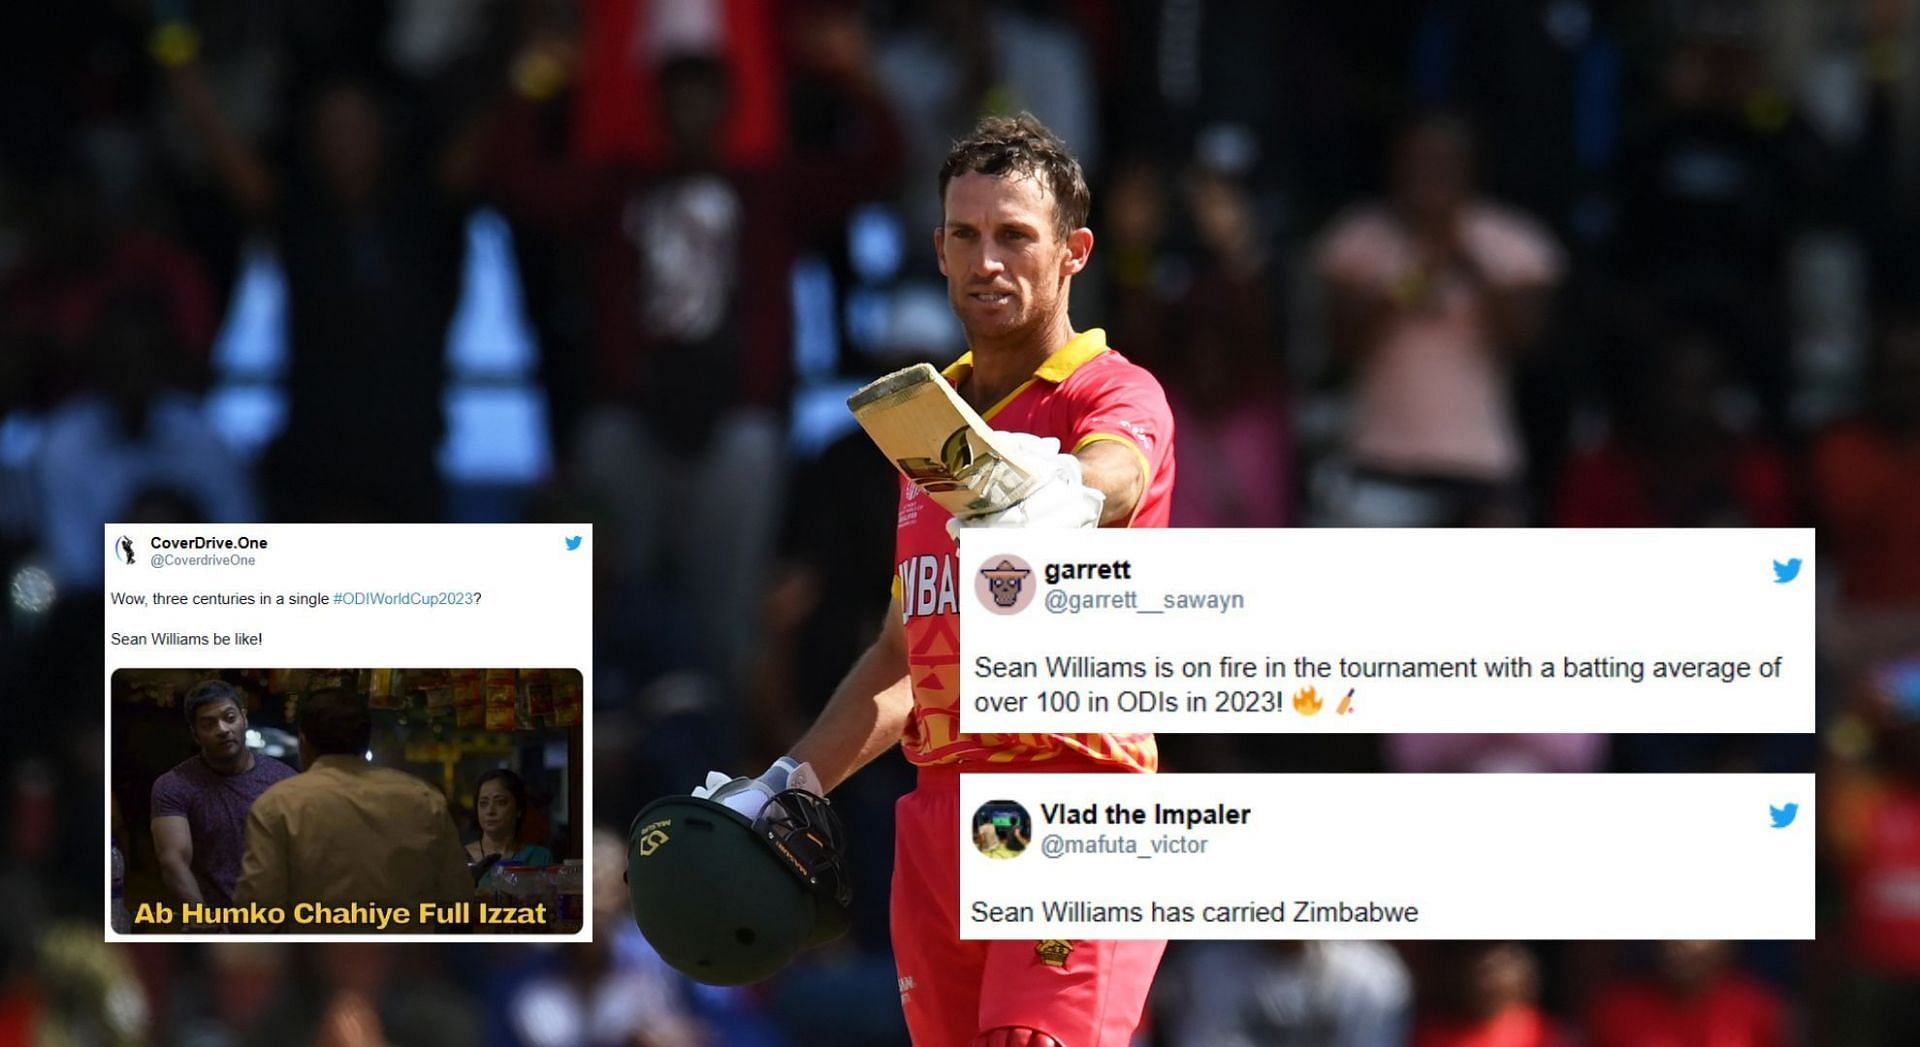 “Ab humko chahiye full izzat” – Fans react as Sean Williams hits 142 off 103 balls against Oman in World Cup Qualifiers